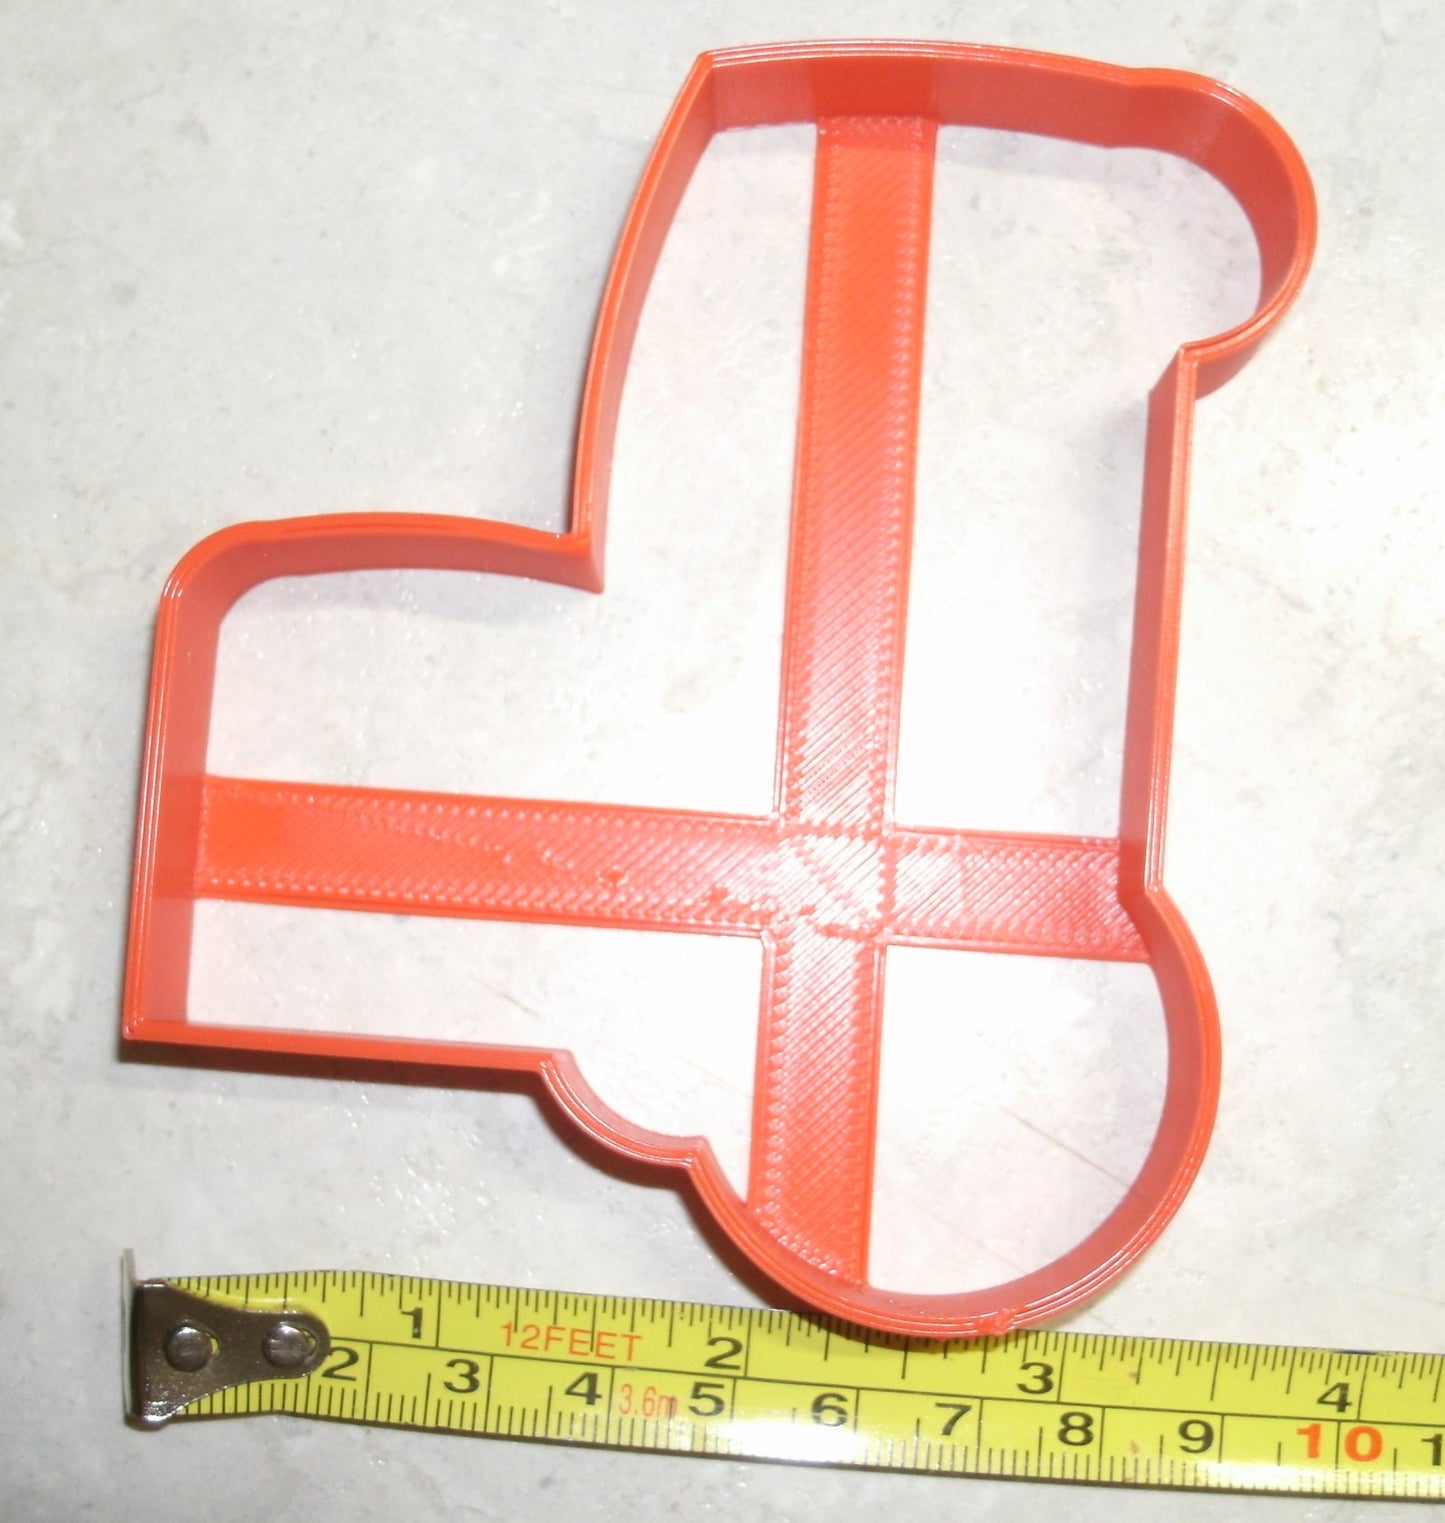 Red Tractor Farm Vehicle Equipment Agriculture Cookie Cutter Made in USA PR701